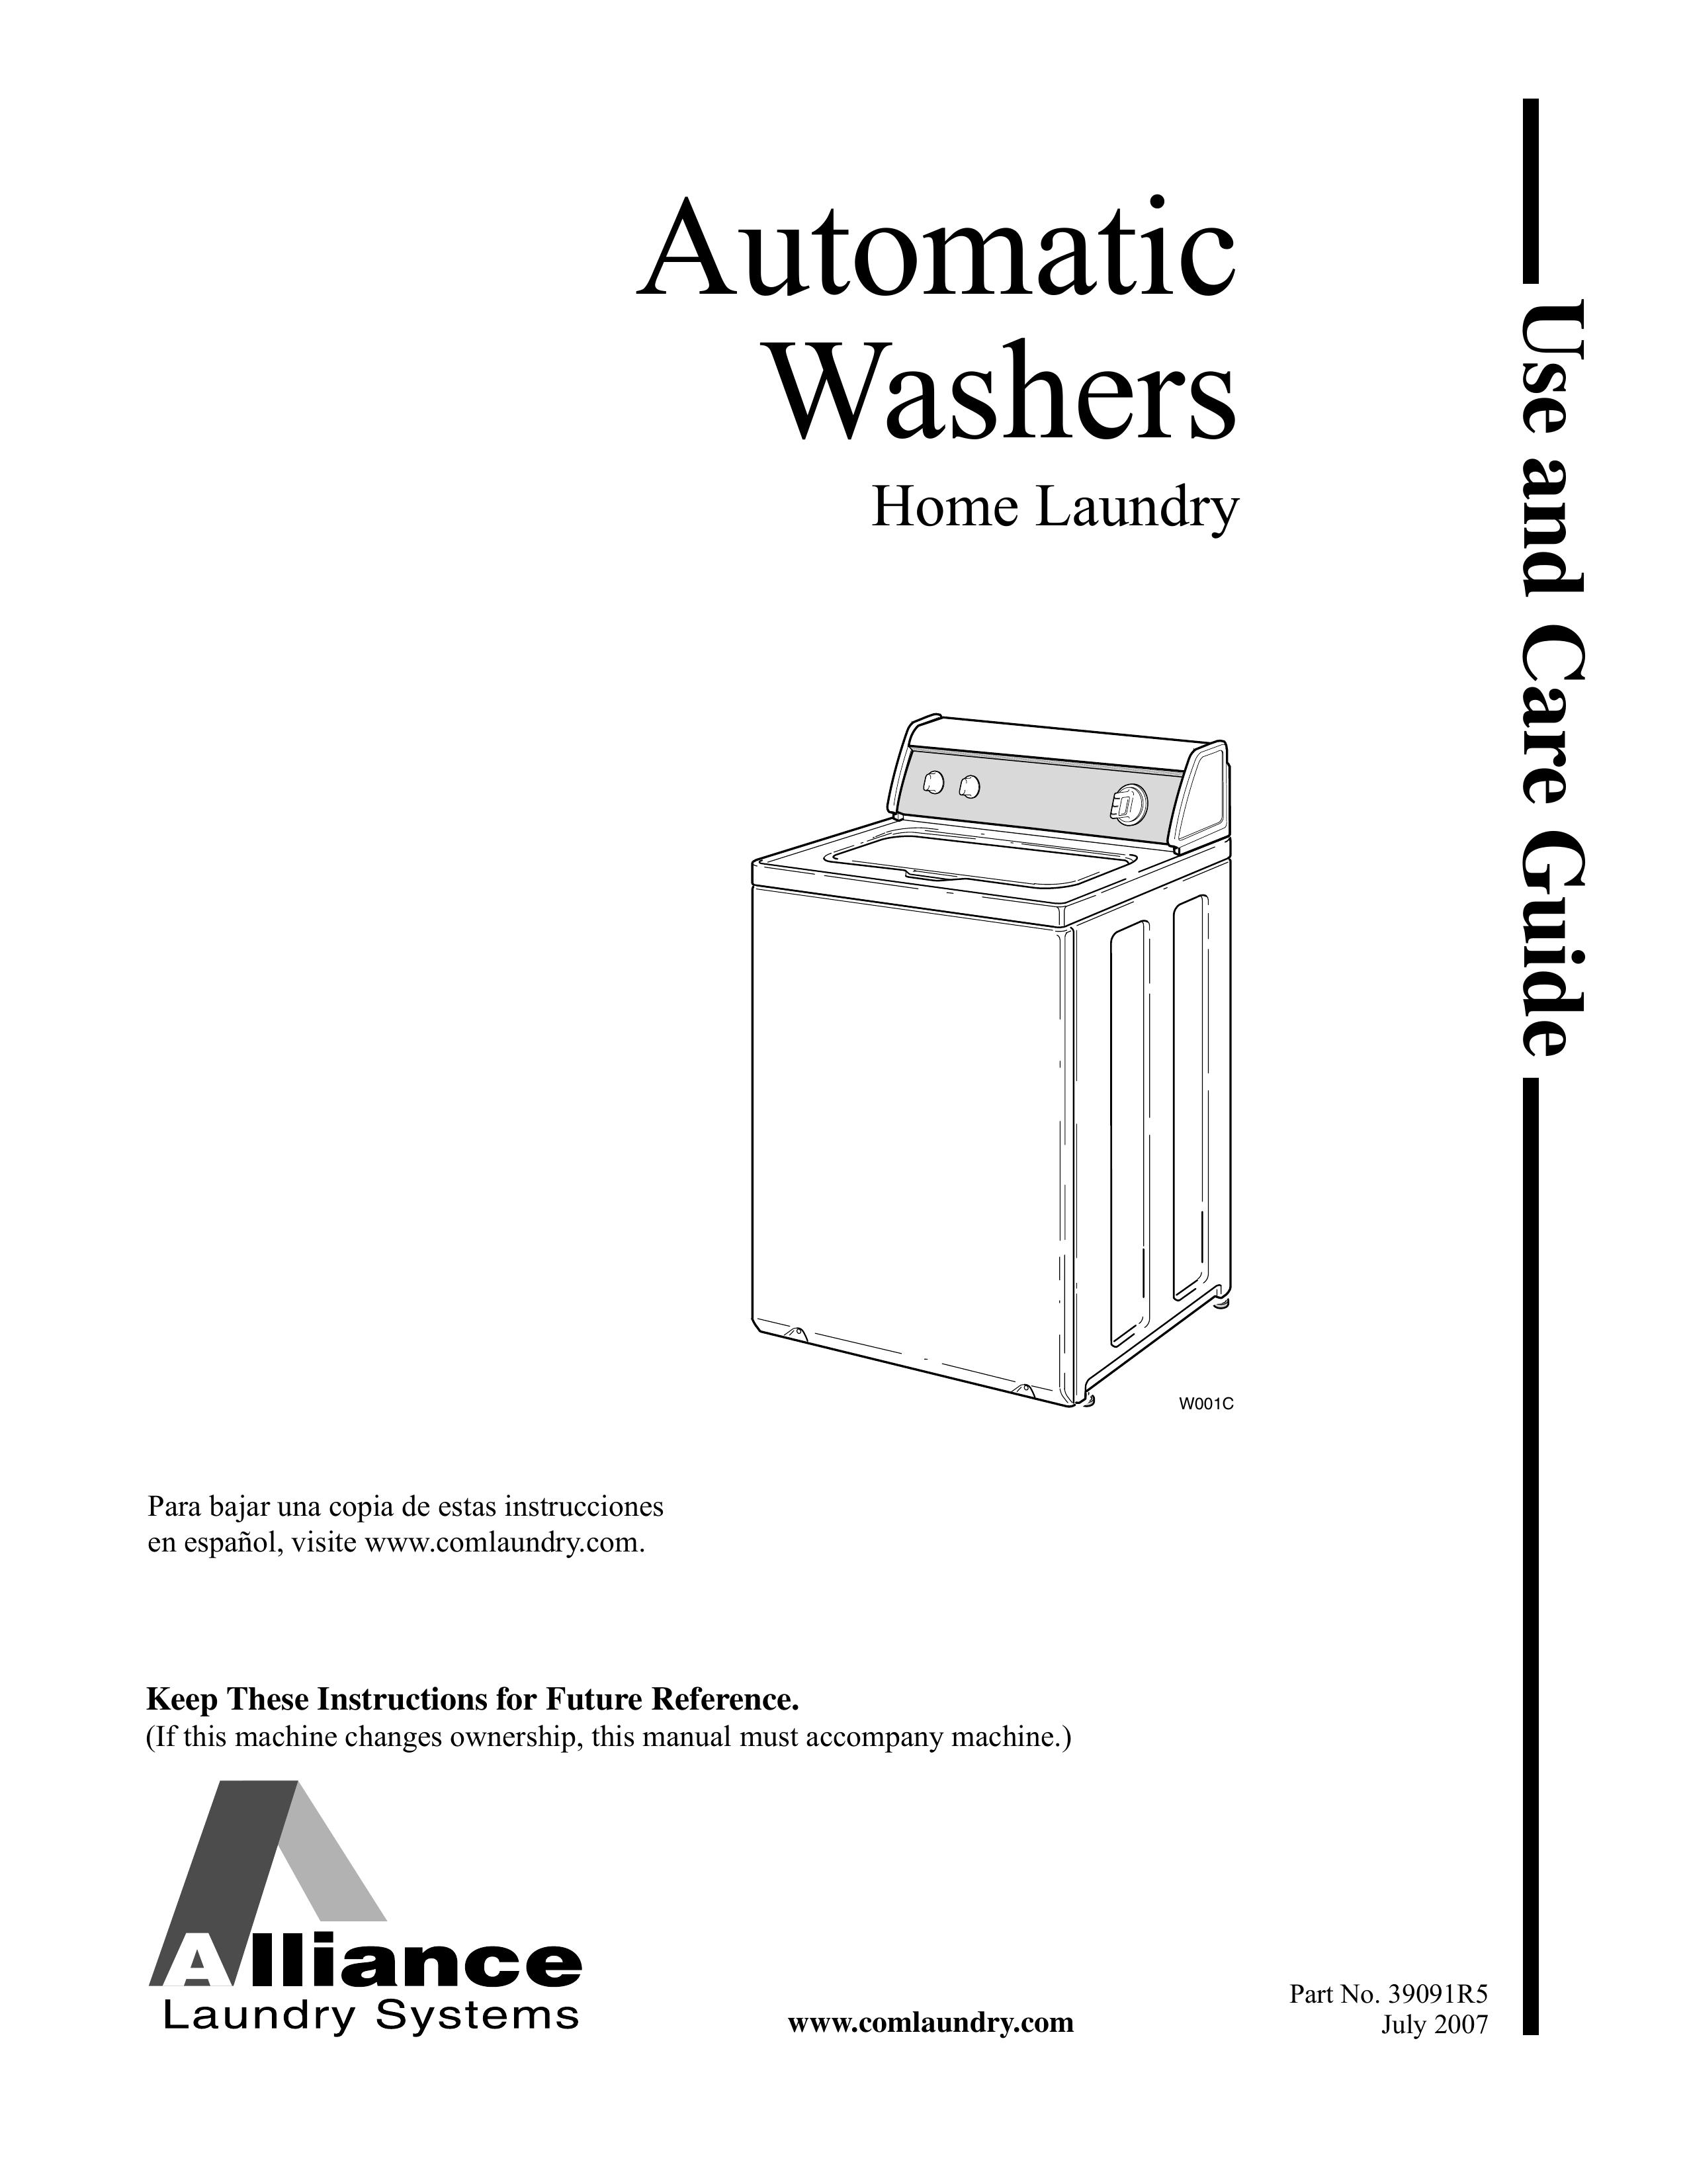 Alliance Laundry Systems LWS45N Washer/Dryer User Manual